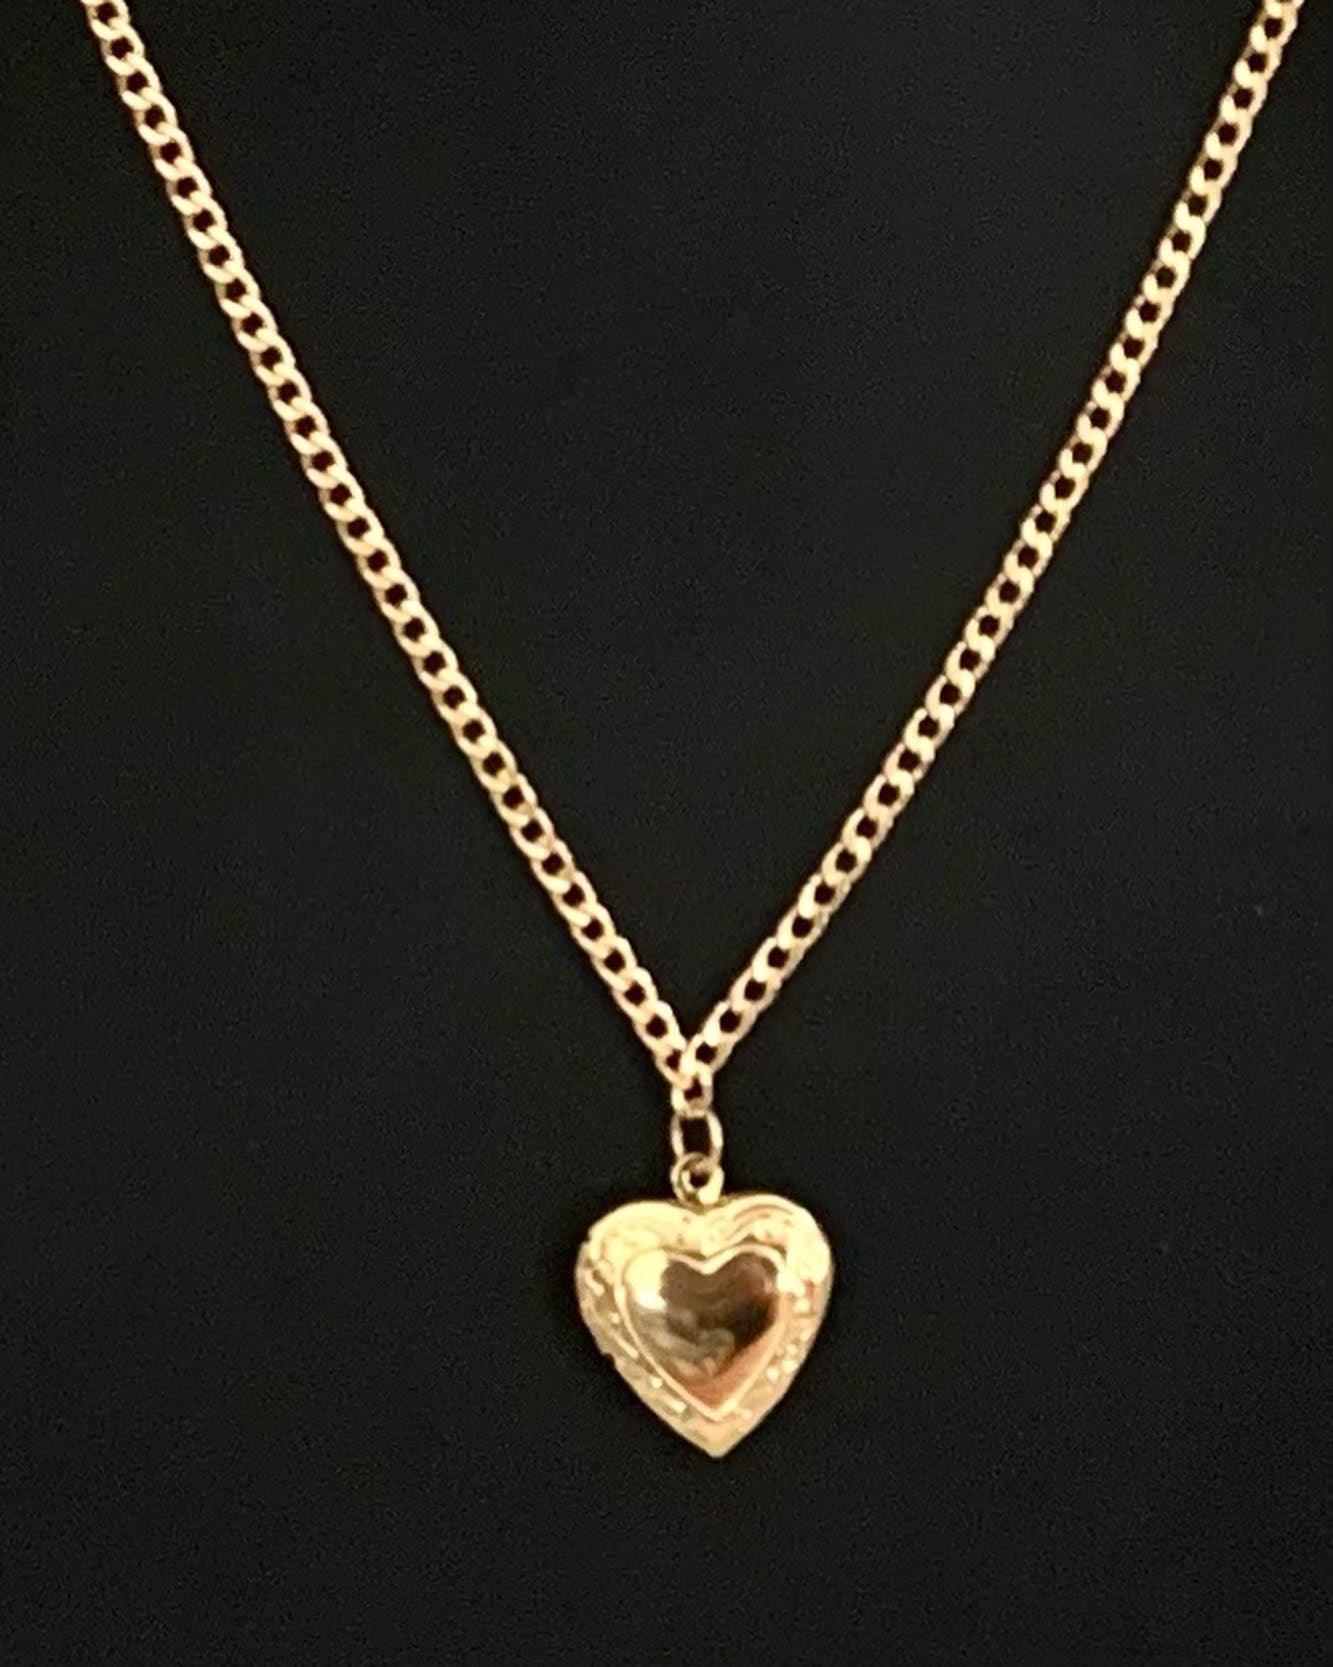 Gold Women Pendant Necklace with Gold Heart Pendant - Brent's Bling